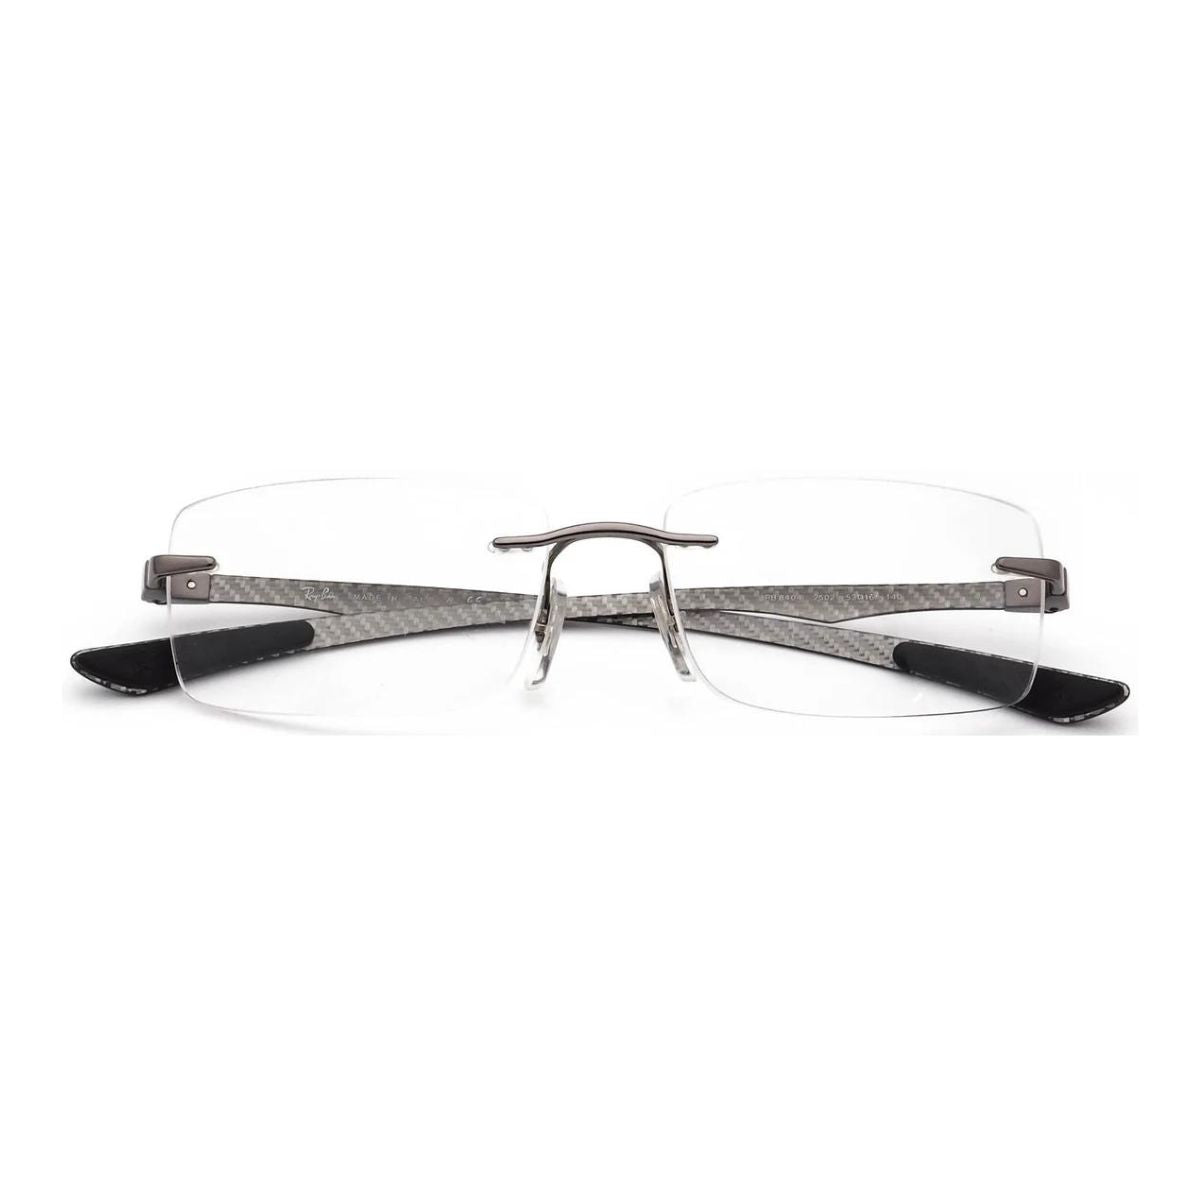 "Rayban 8404 2501 glasses frame for men and women online at optorium"